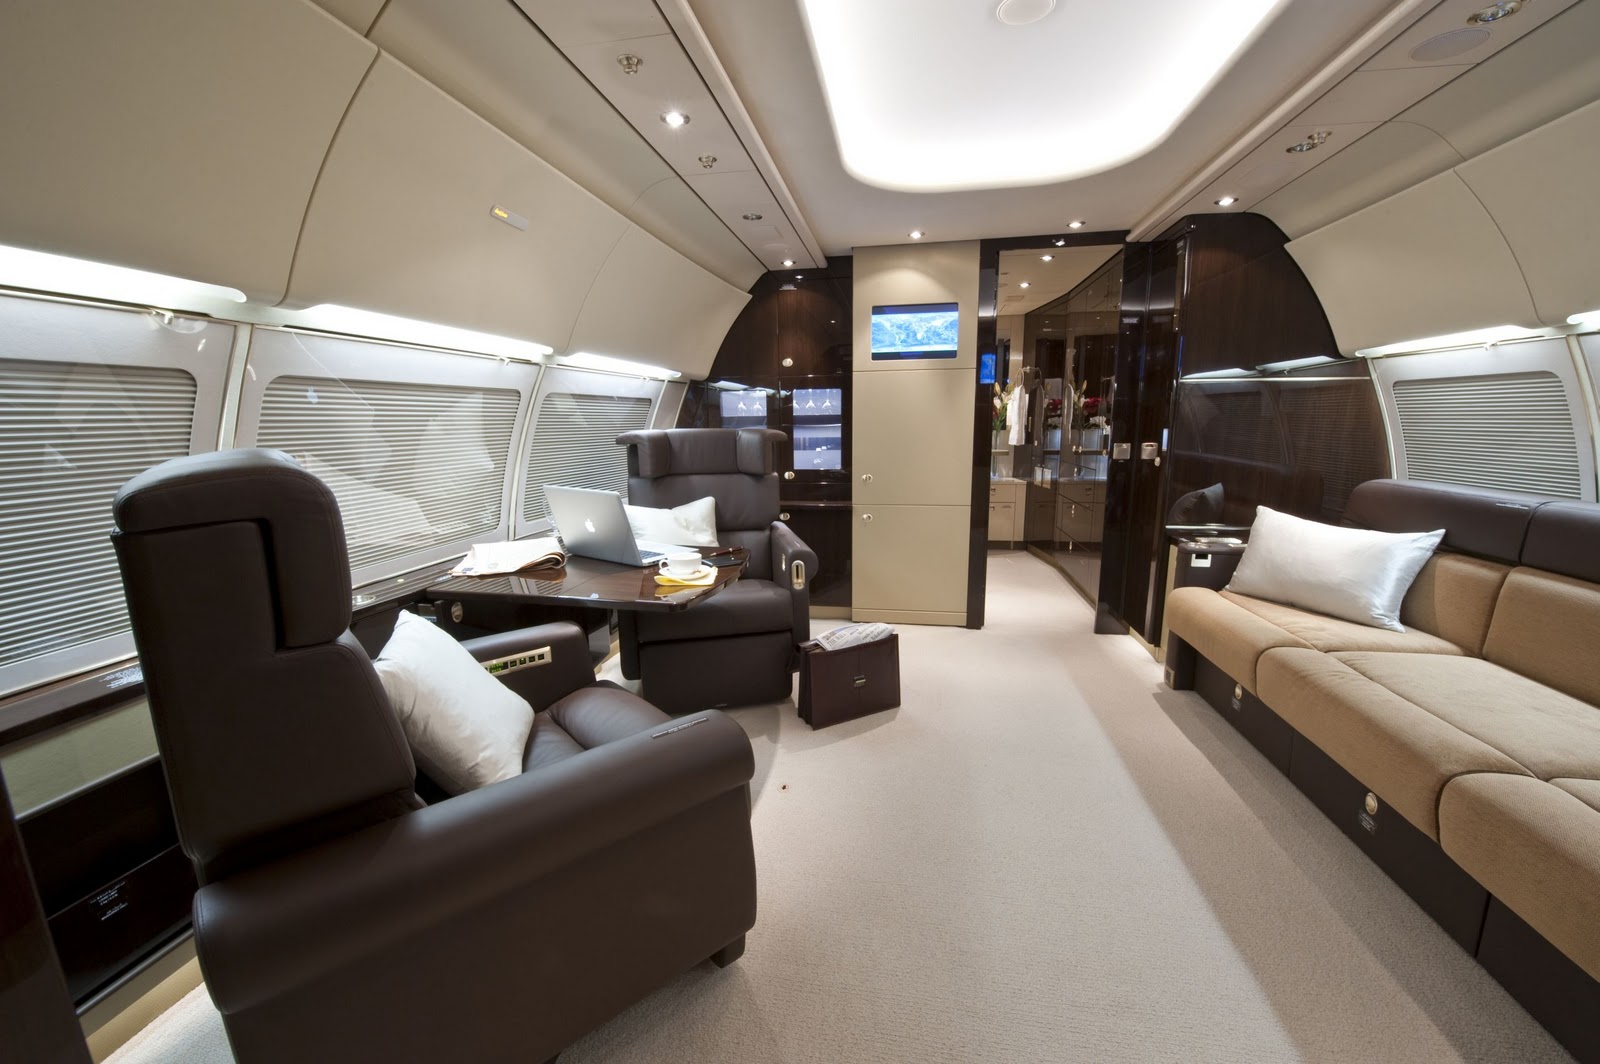 $53 Million Private Jet by Embraer | Architectural Digest